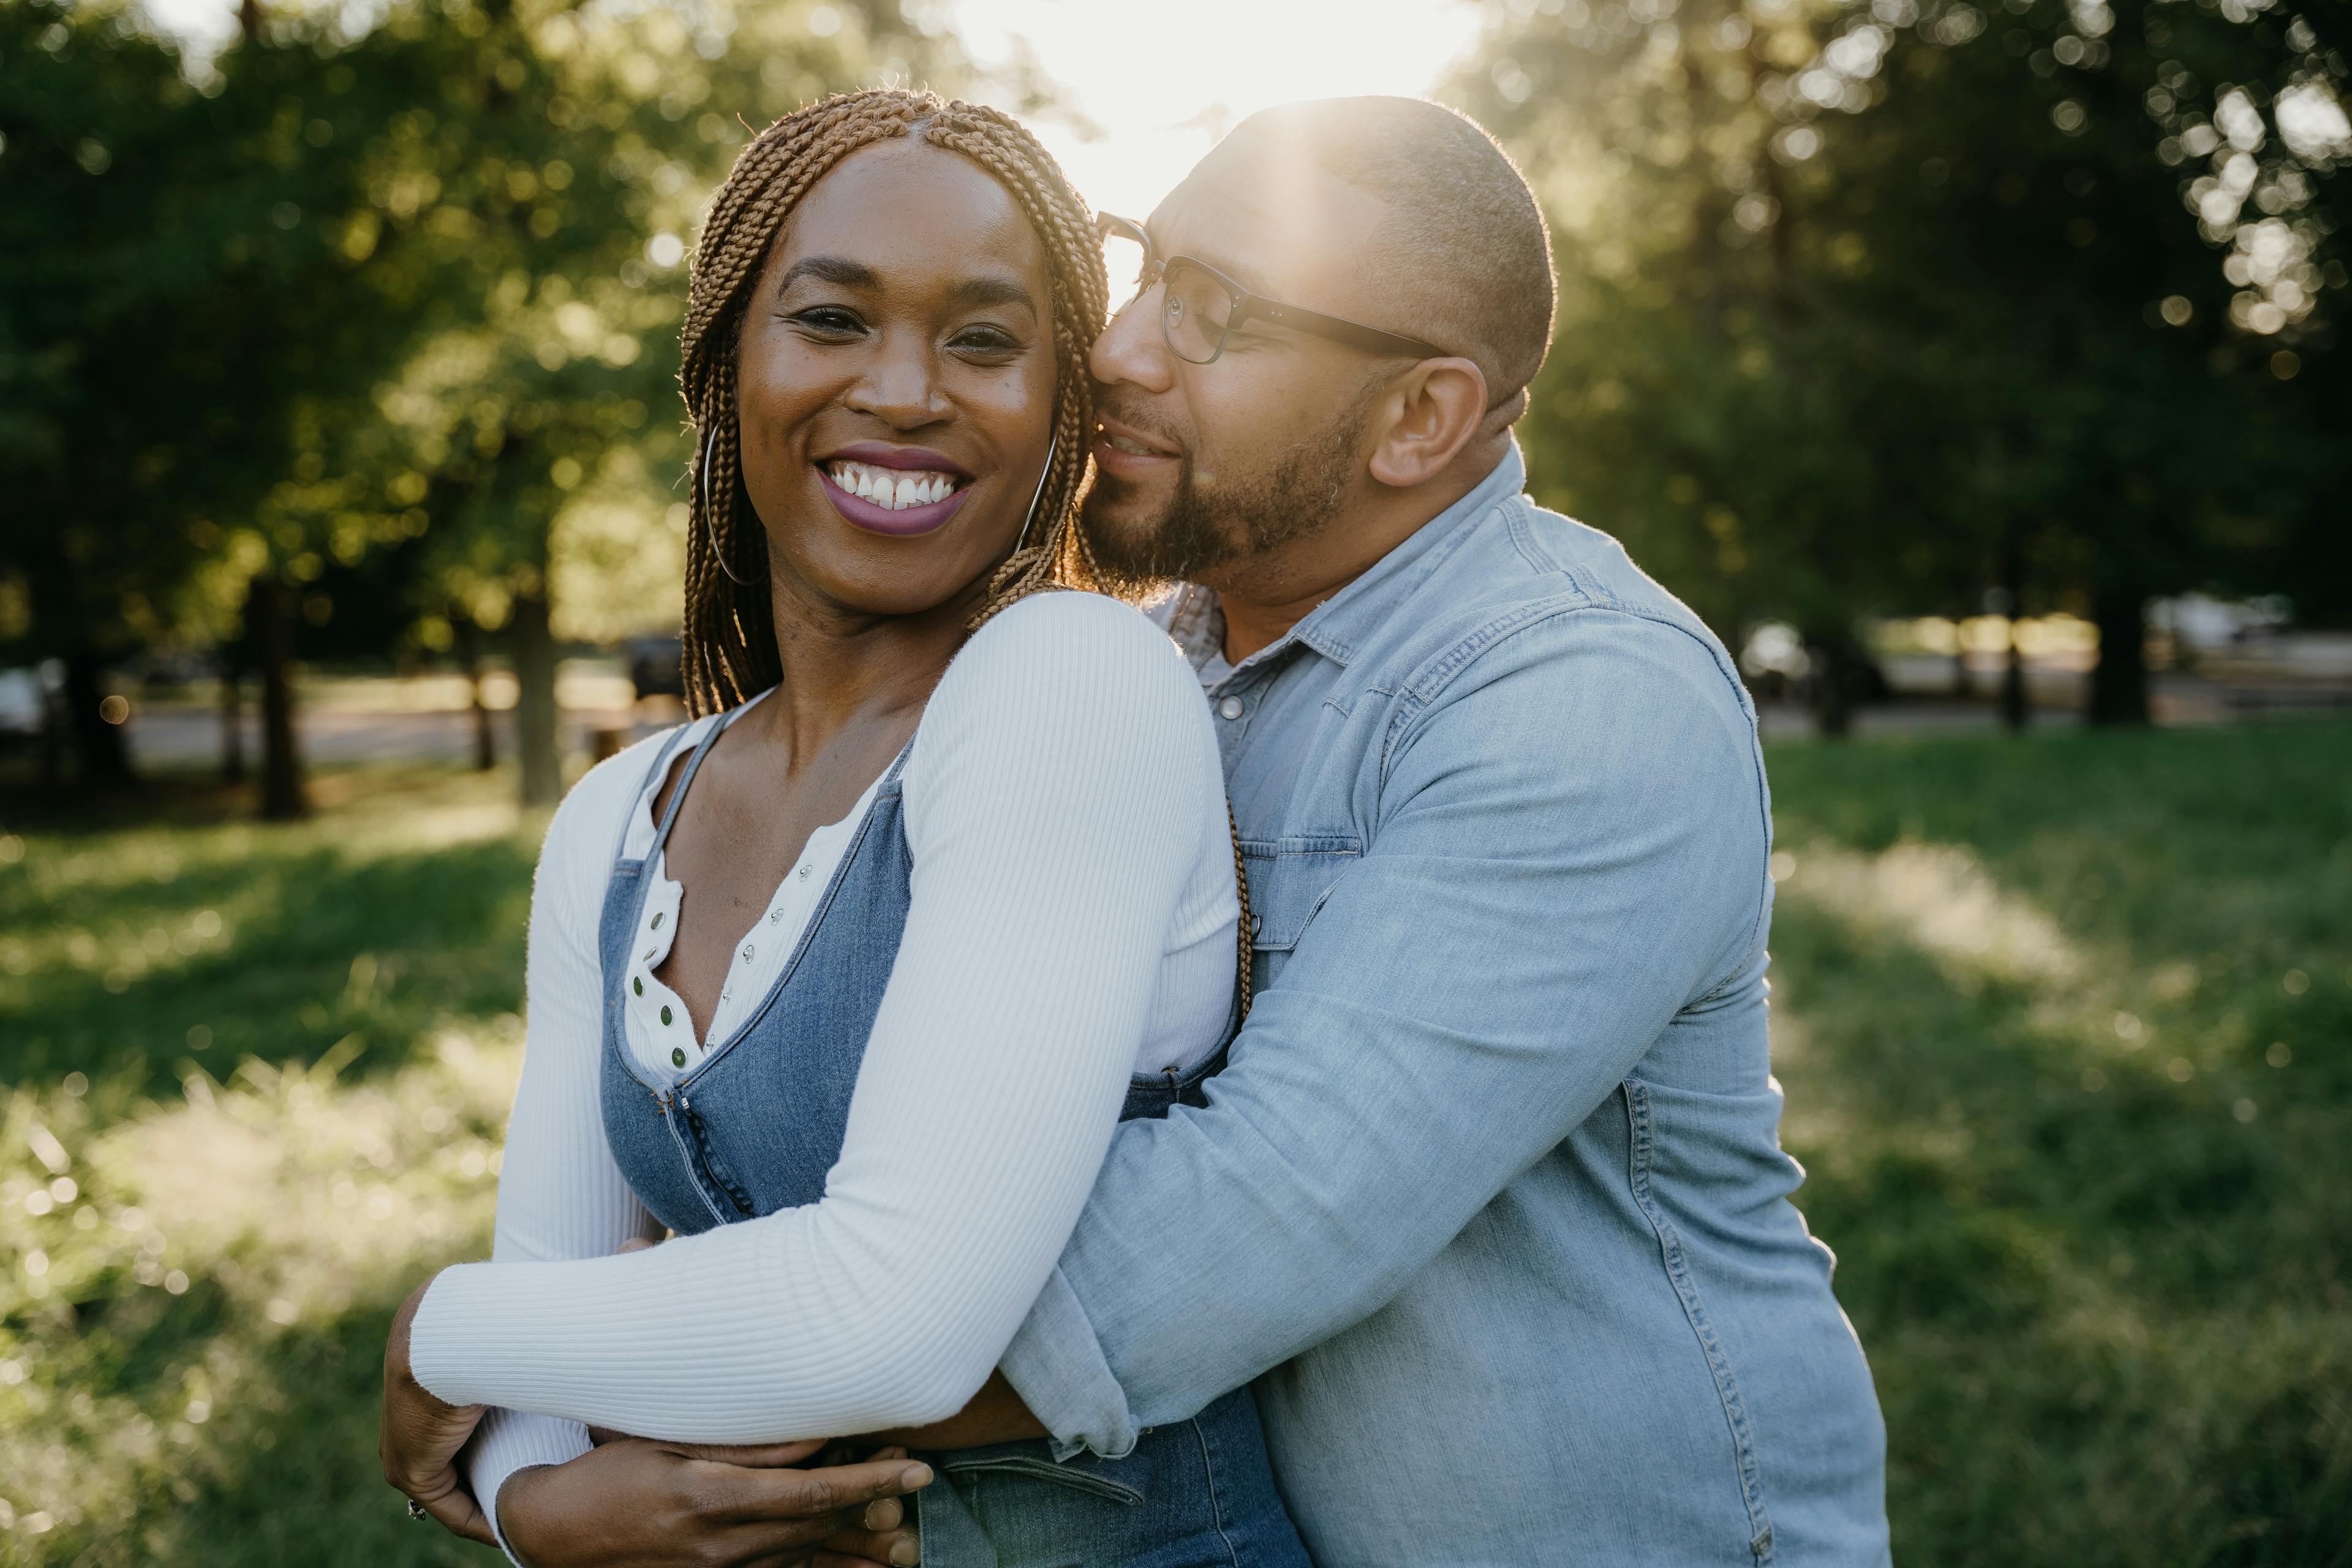 A couple embracing and smiling in the glow of sunset in a park.